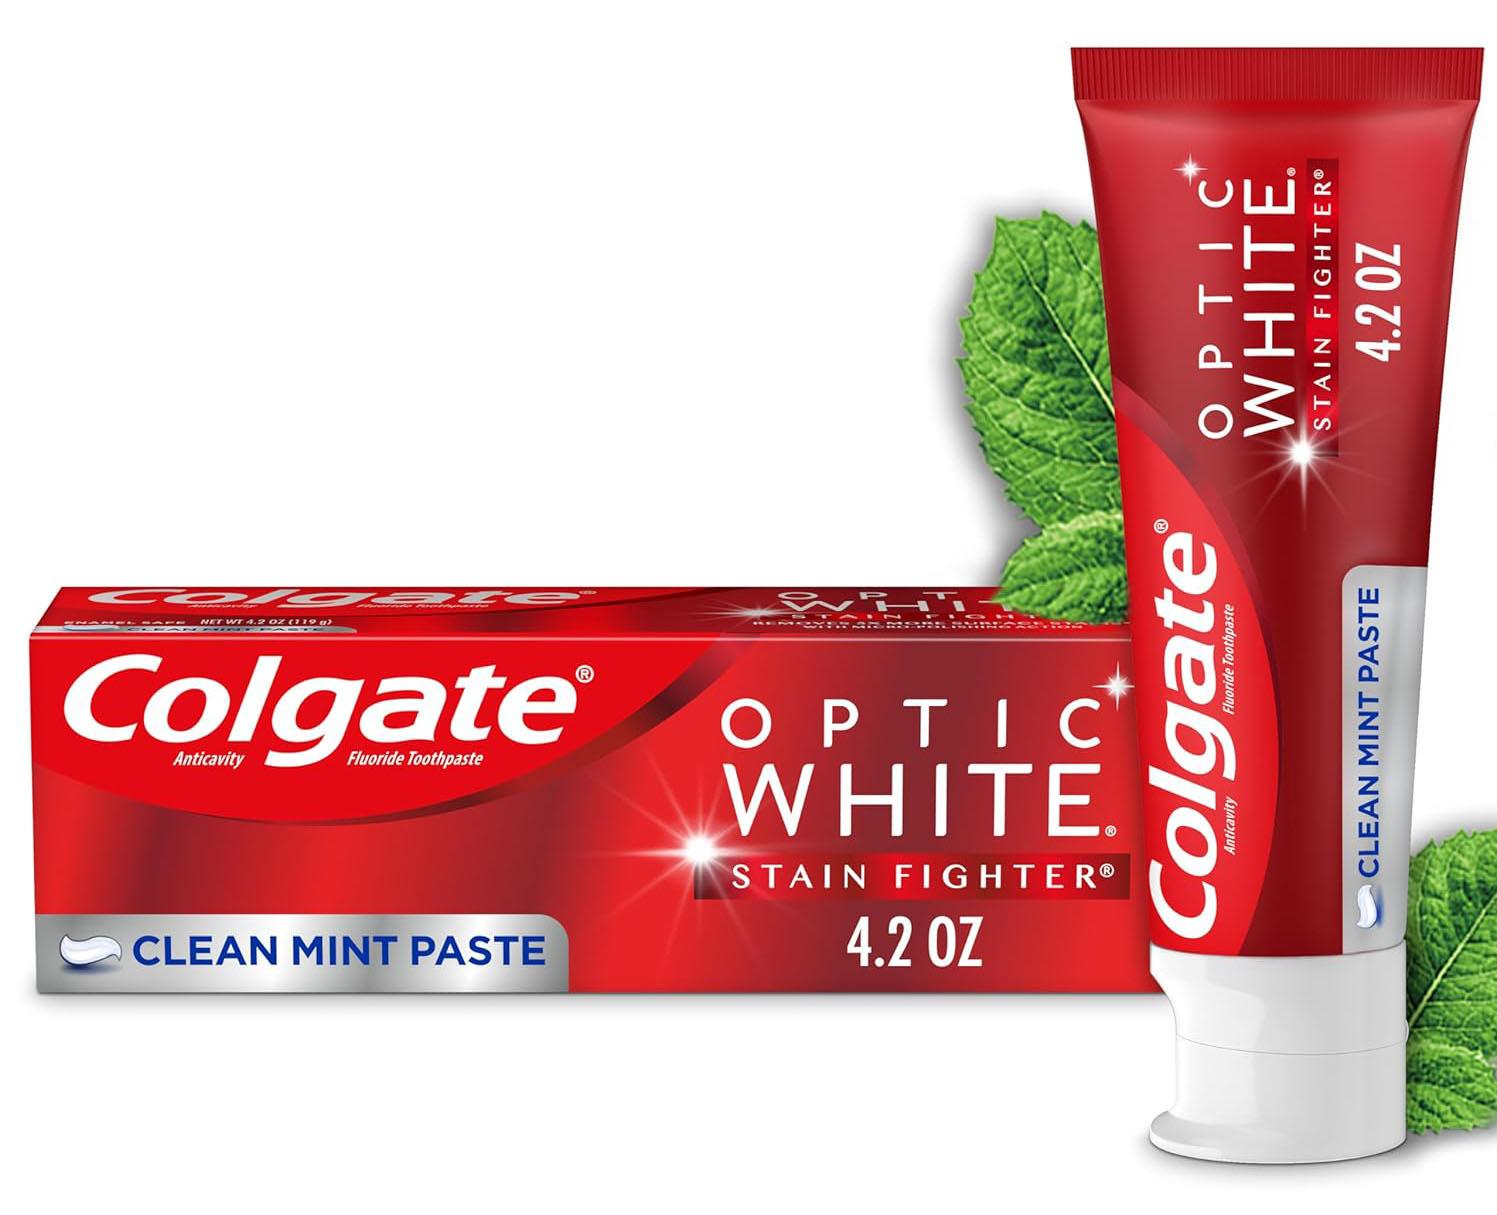 Colgate Optic White Whitening Toothpaste 3 Pack + $5 Amazon Credit for $9.95